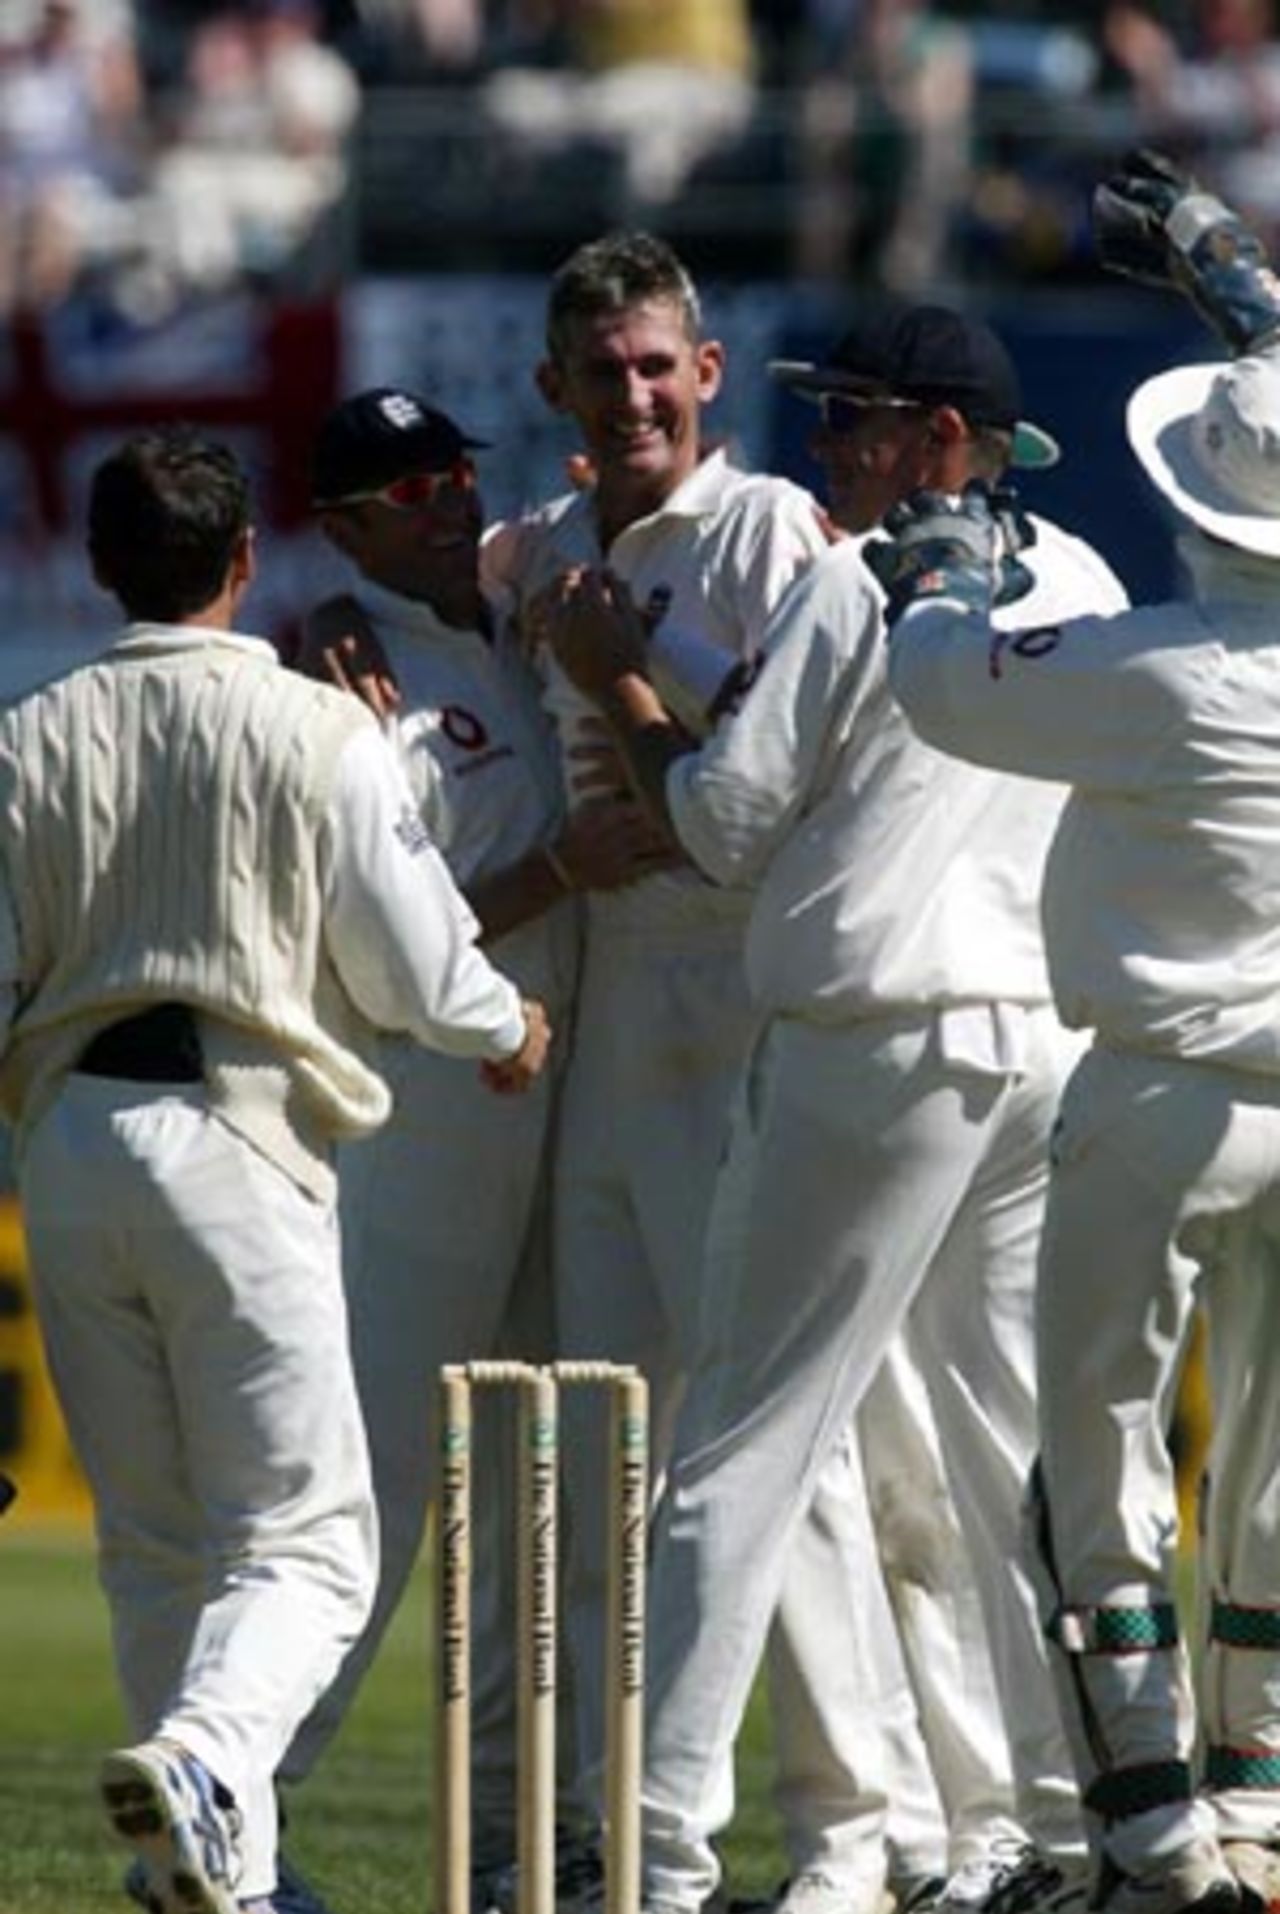 England bowler Andy Caddick is congratulated by team-mates after dismissing New Zealand batsman Adam Parore, lbw for 0 in his first innings. From left, Mark Ramprakash, Mark Butcher, Caddick, Ashley Giles and James Foster. 1st Test: New Zealand v England at Jade Stadium, Christchurch, 13-17 March 2002 (14 March 2002).